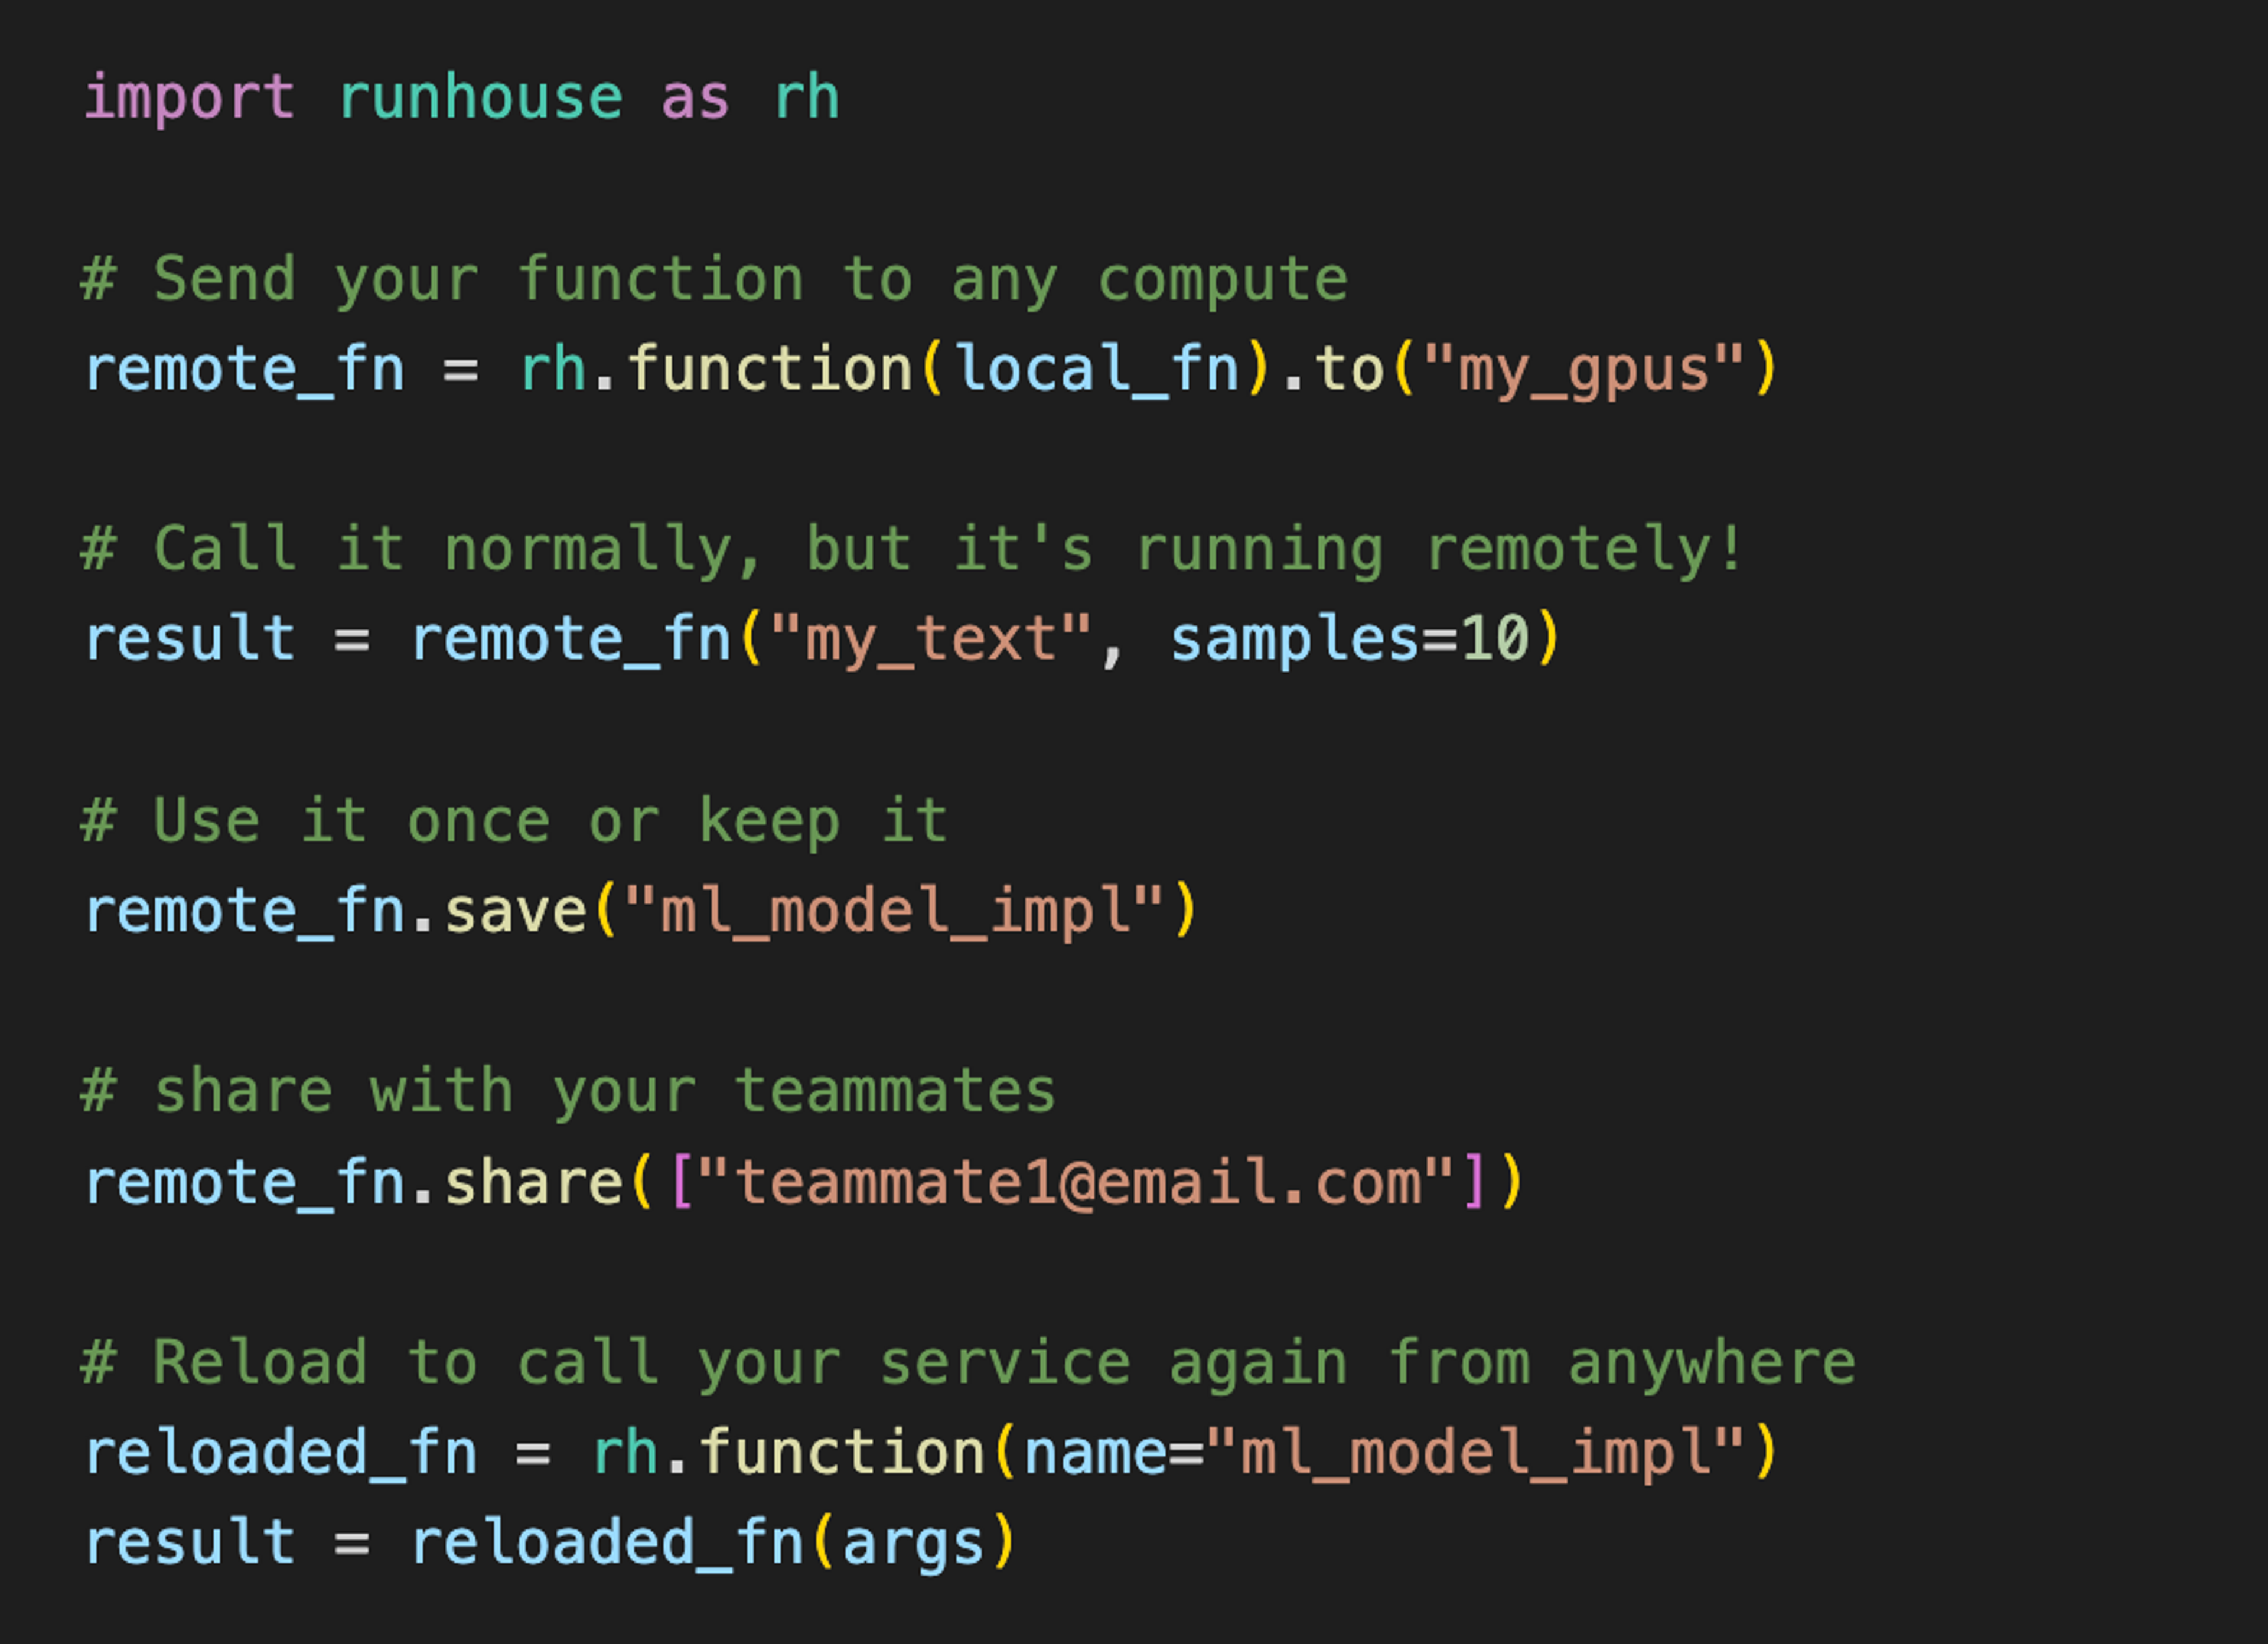 Code blocks showing Runhouse features in Python: "Send your function to any compute" "Call it normally, but it's running remotely!" "Use it once or keep it" "Share with your teammates" "Reload to call your service again from anywhere"